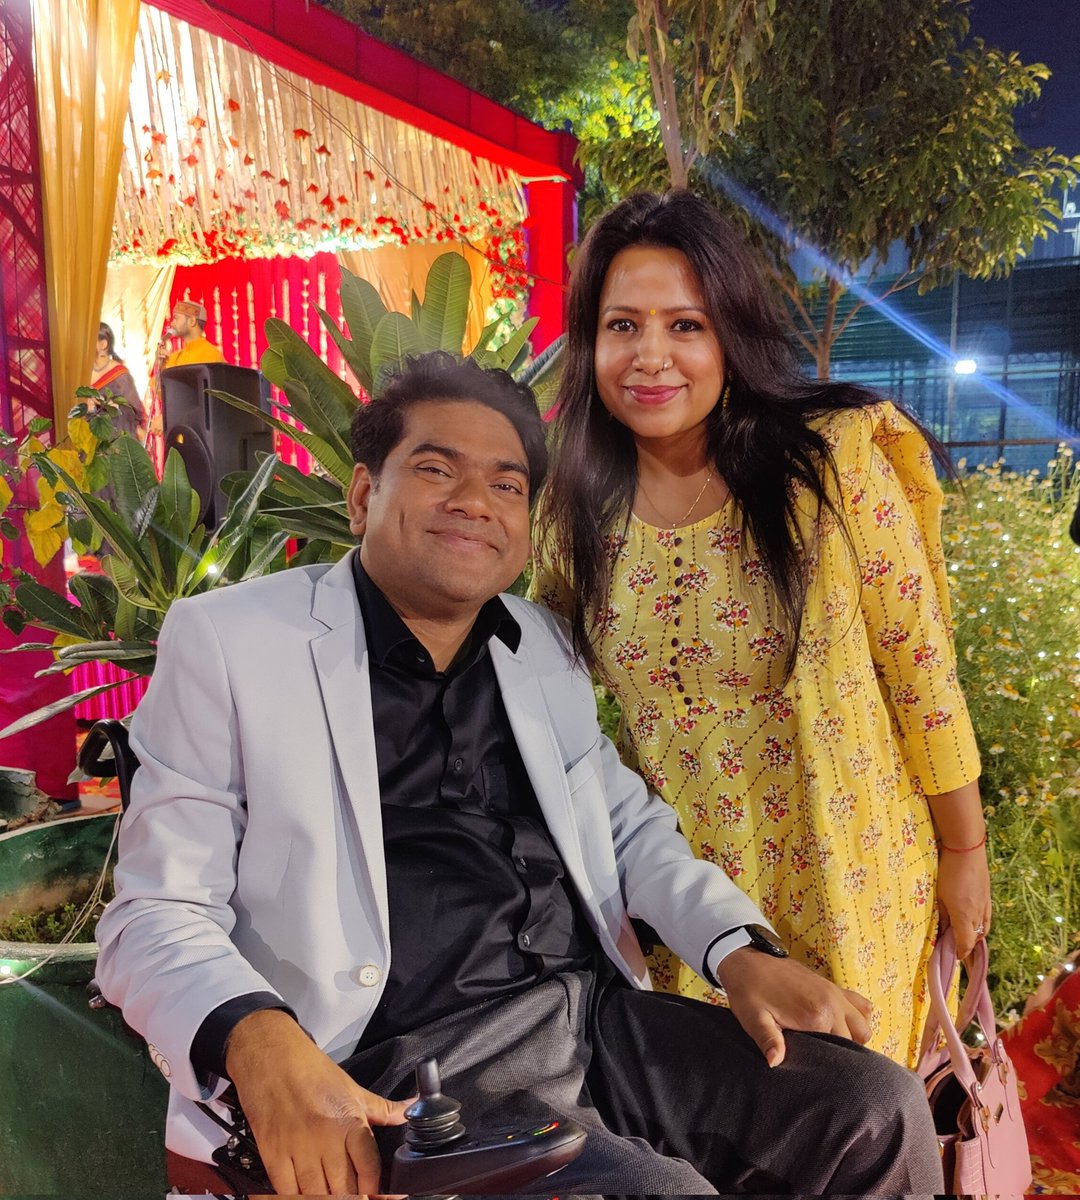 Spent the evening today at @SheroesHangout celebrating union of Ritu & Sahil. 

Ritu is an acid attack survivor herself who spent last 10 years working with acid attack survivors at @SAAWorks that does some phenomal humanitarian work for acid attack survivors

I have less words